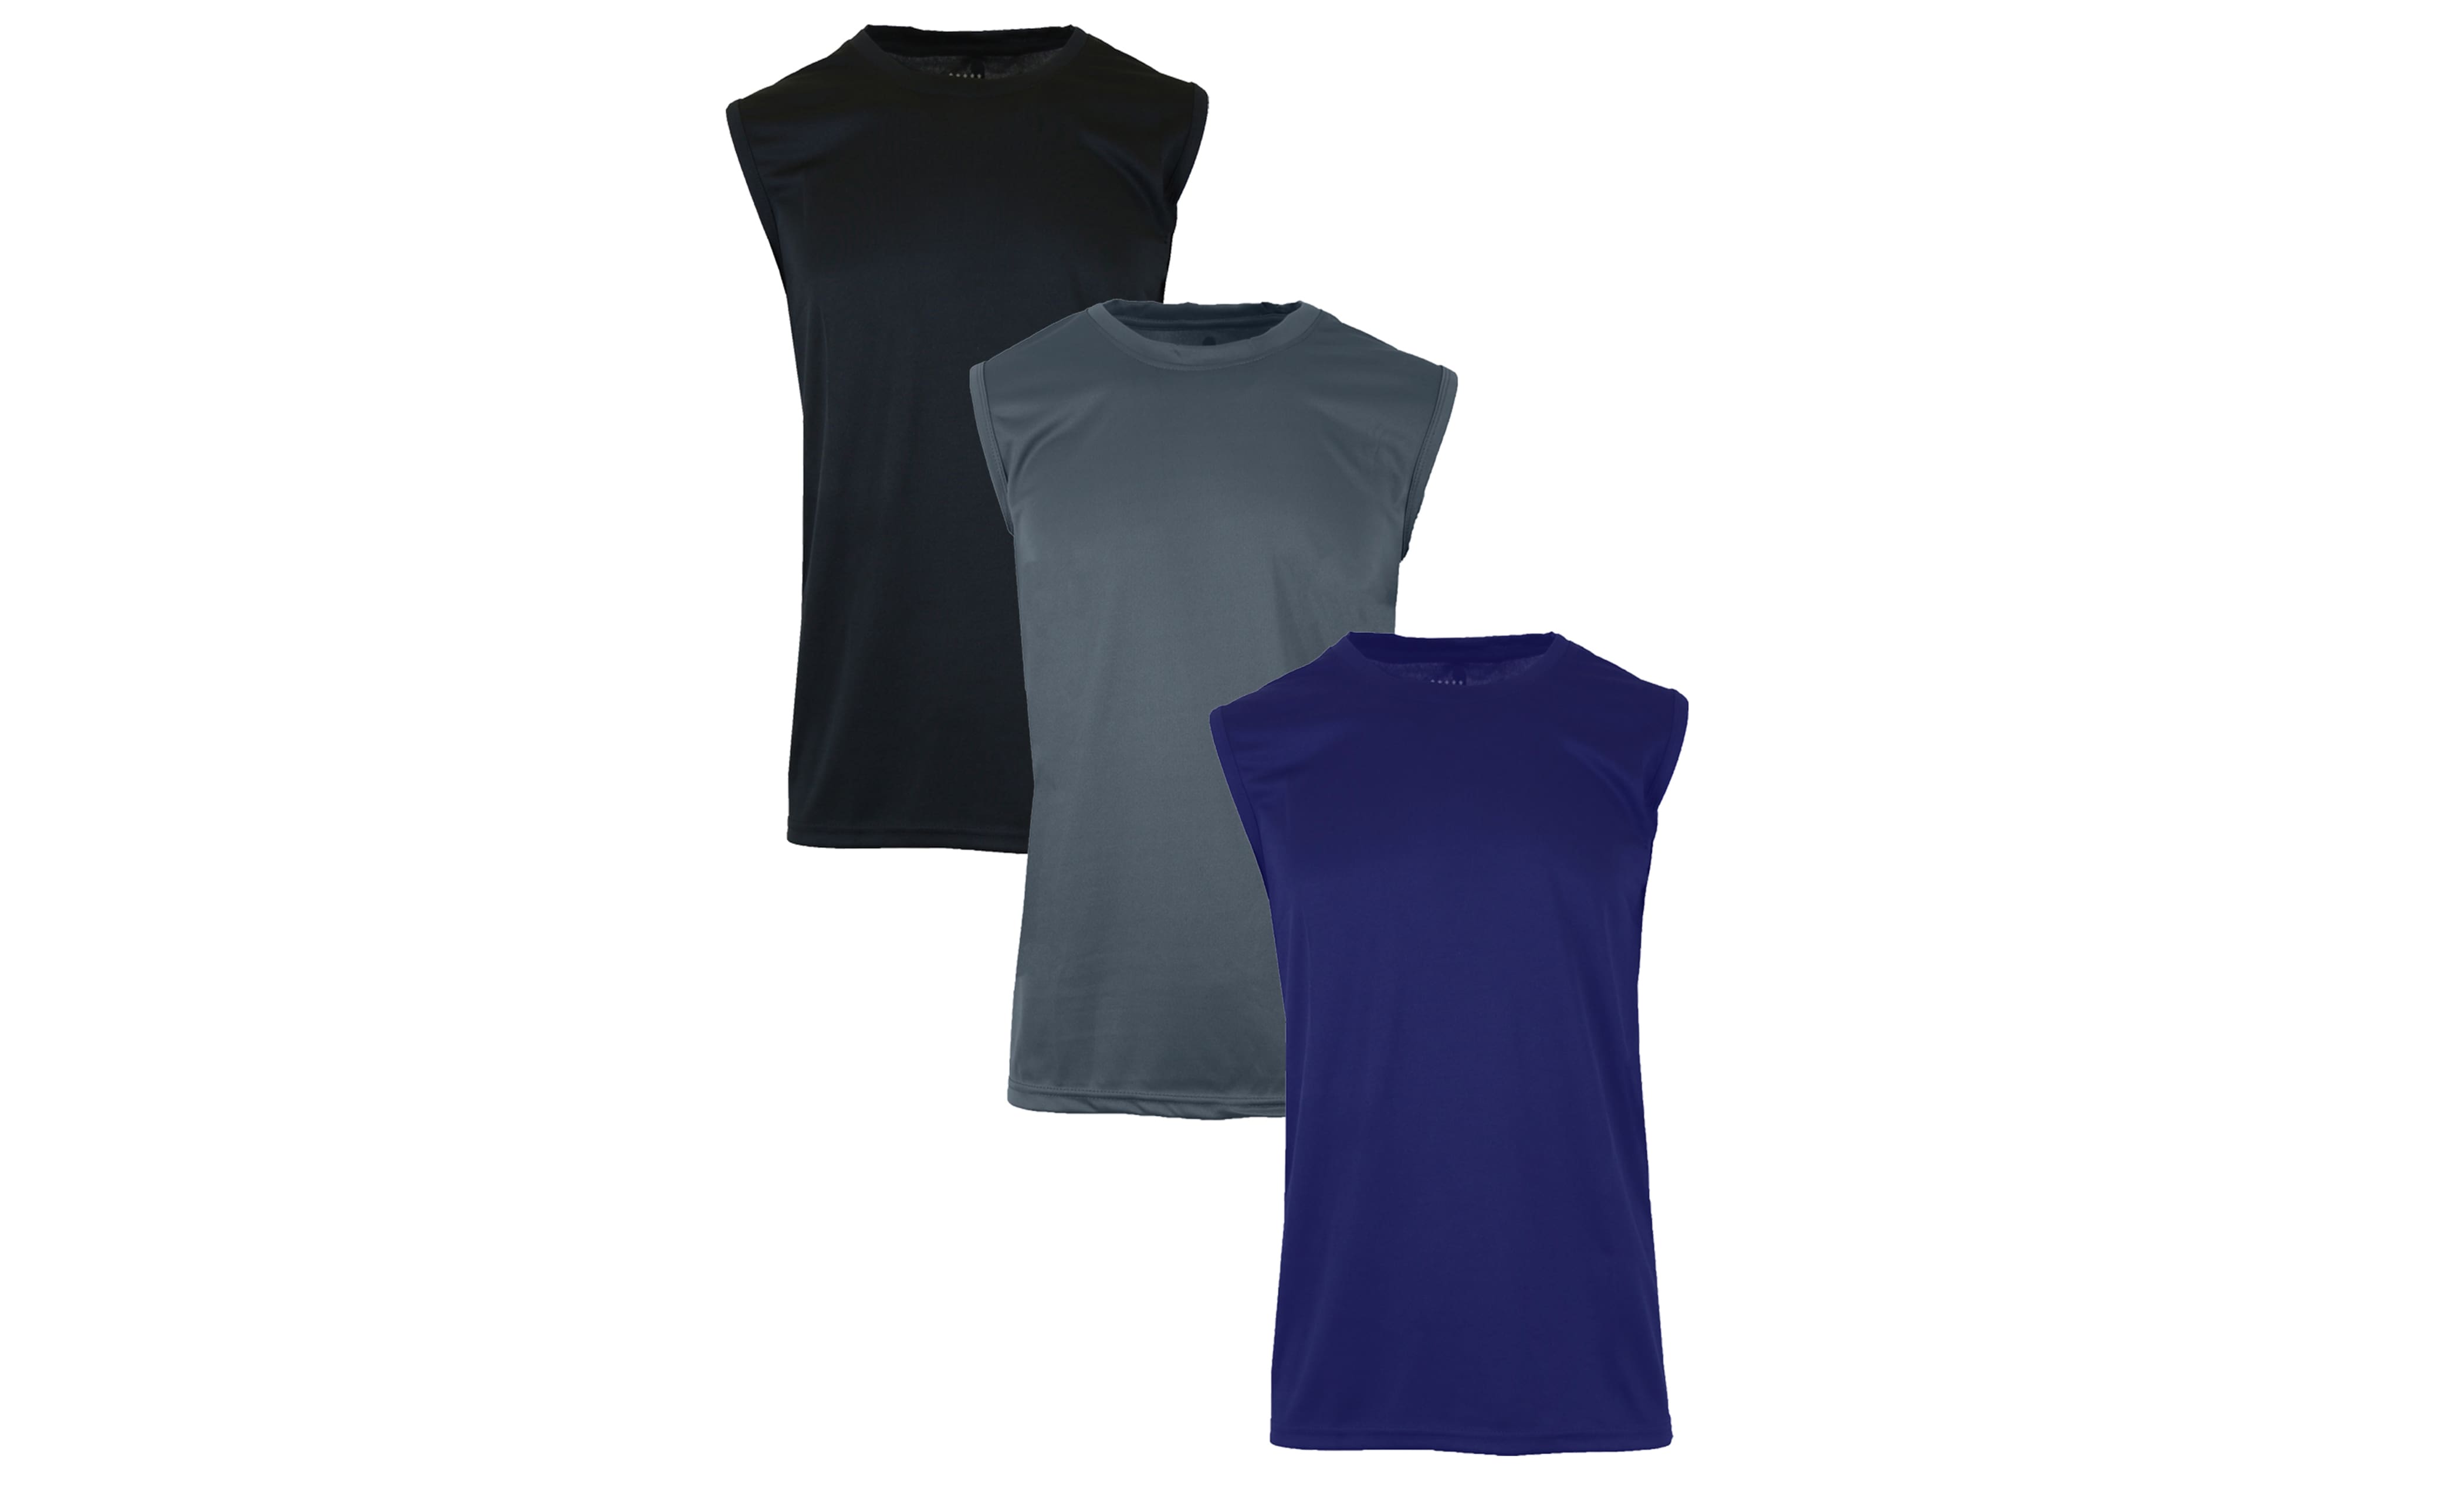 Galaxy by Harvic Performance Men's Muscle T-Shirt 3 Pack